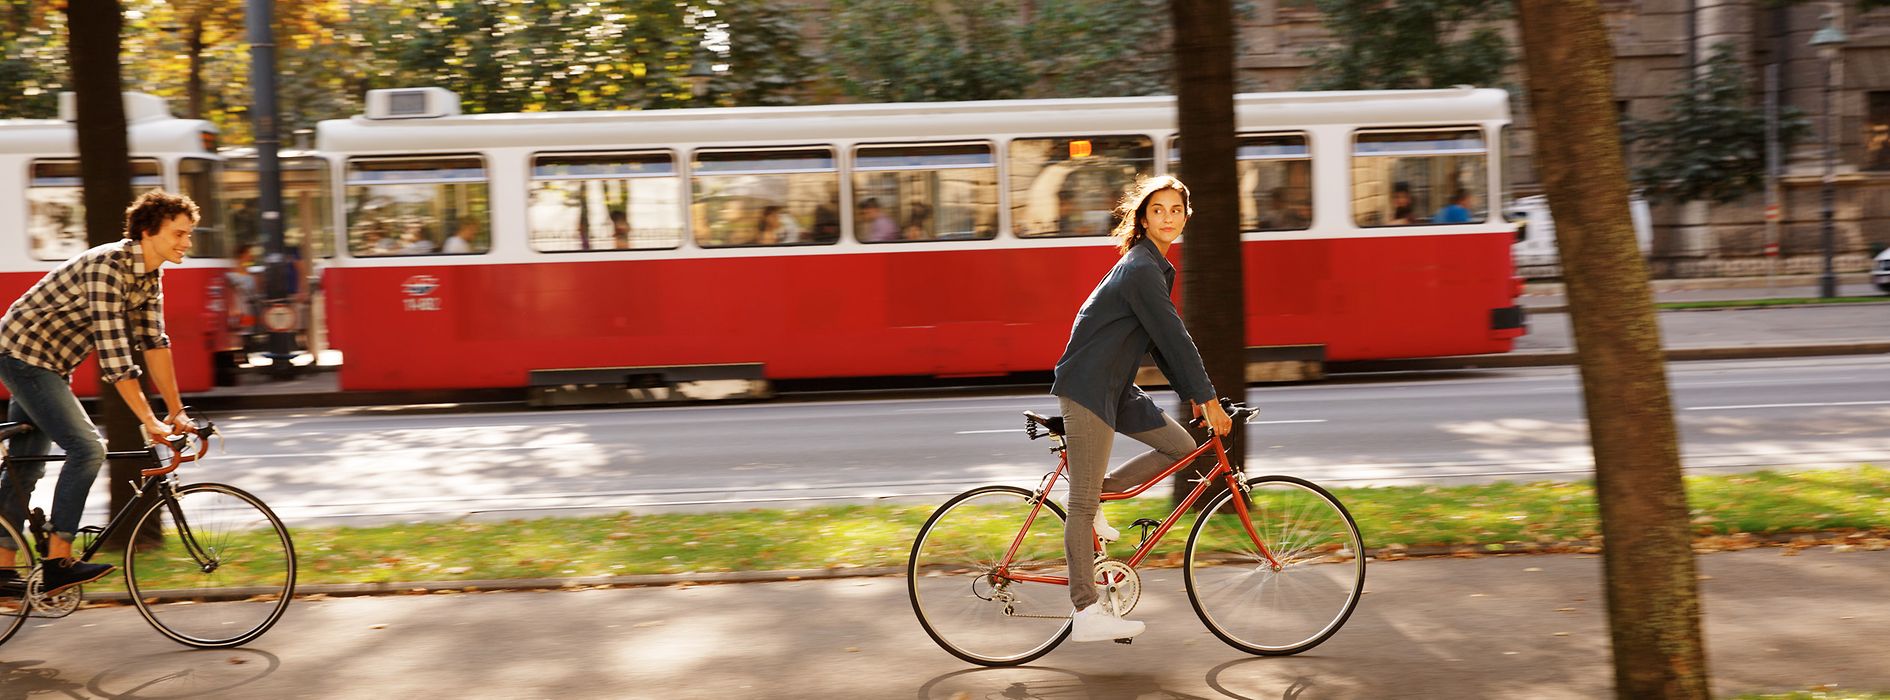 Cyclists on the bike path along Ringstrasse boulevard